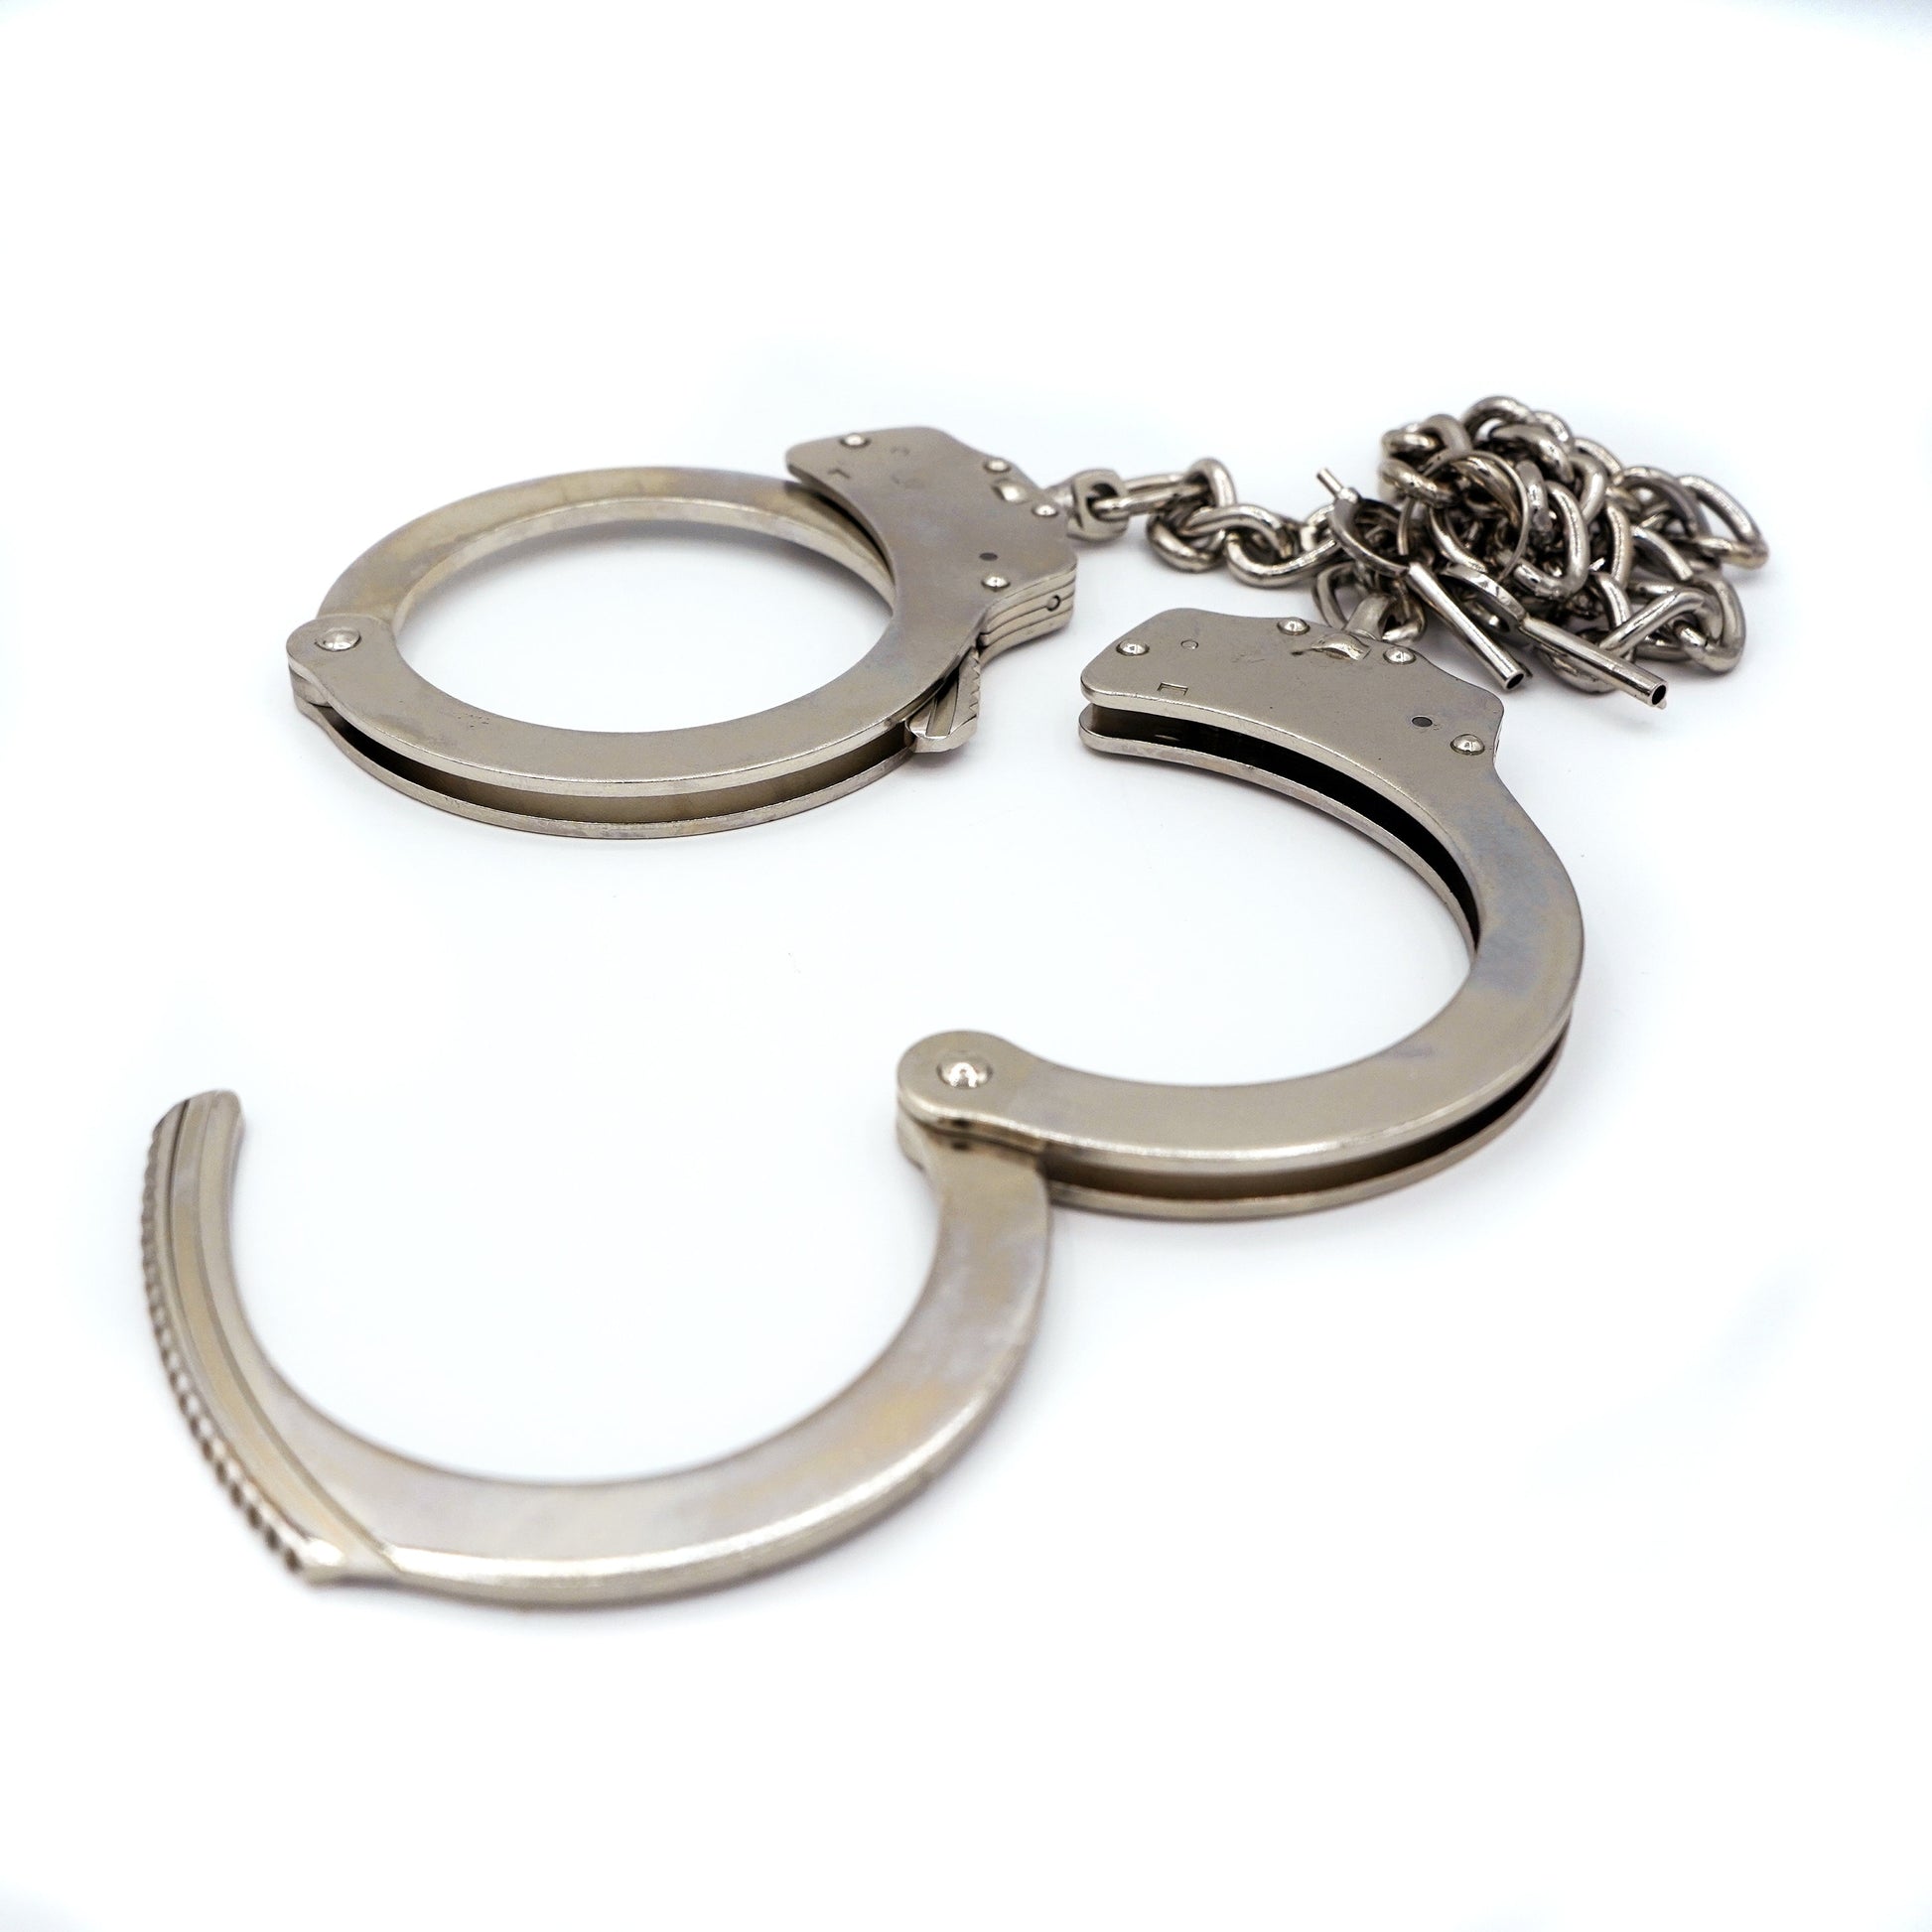 Police Steel Ankle Cuffs with Chain